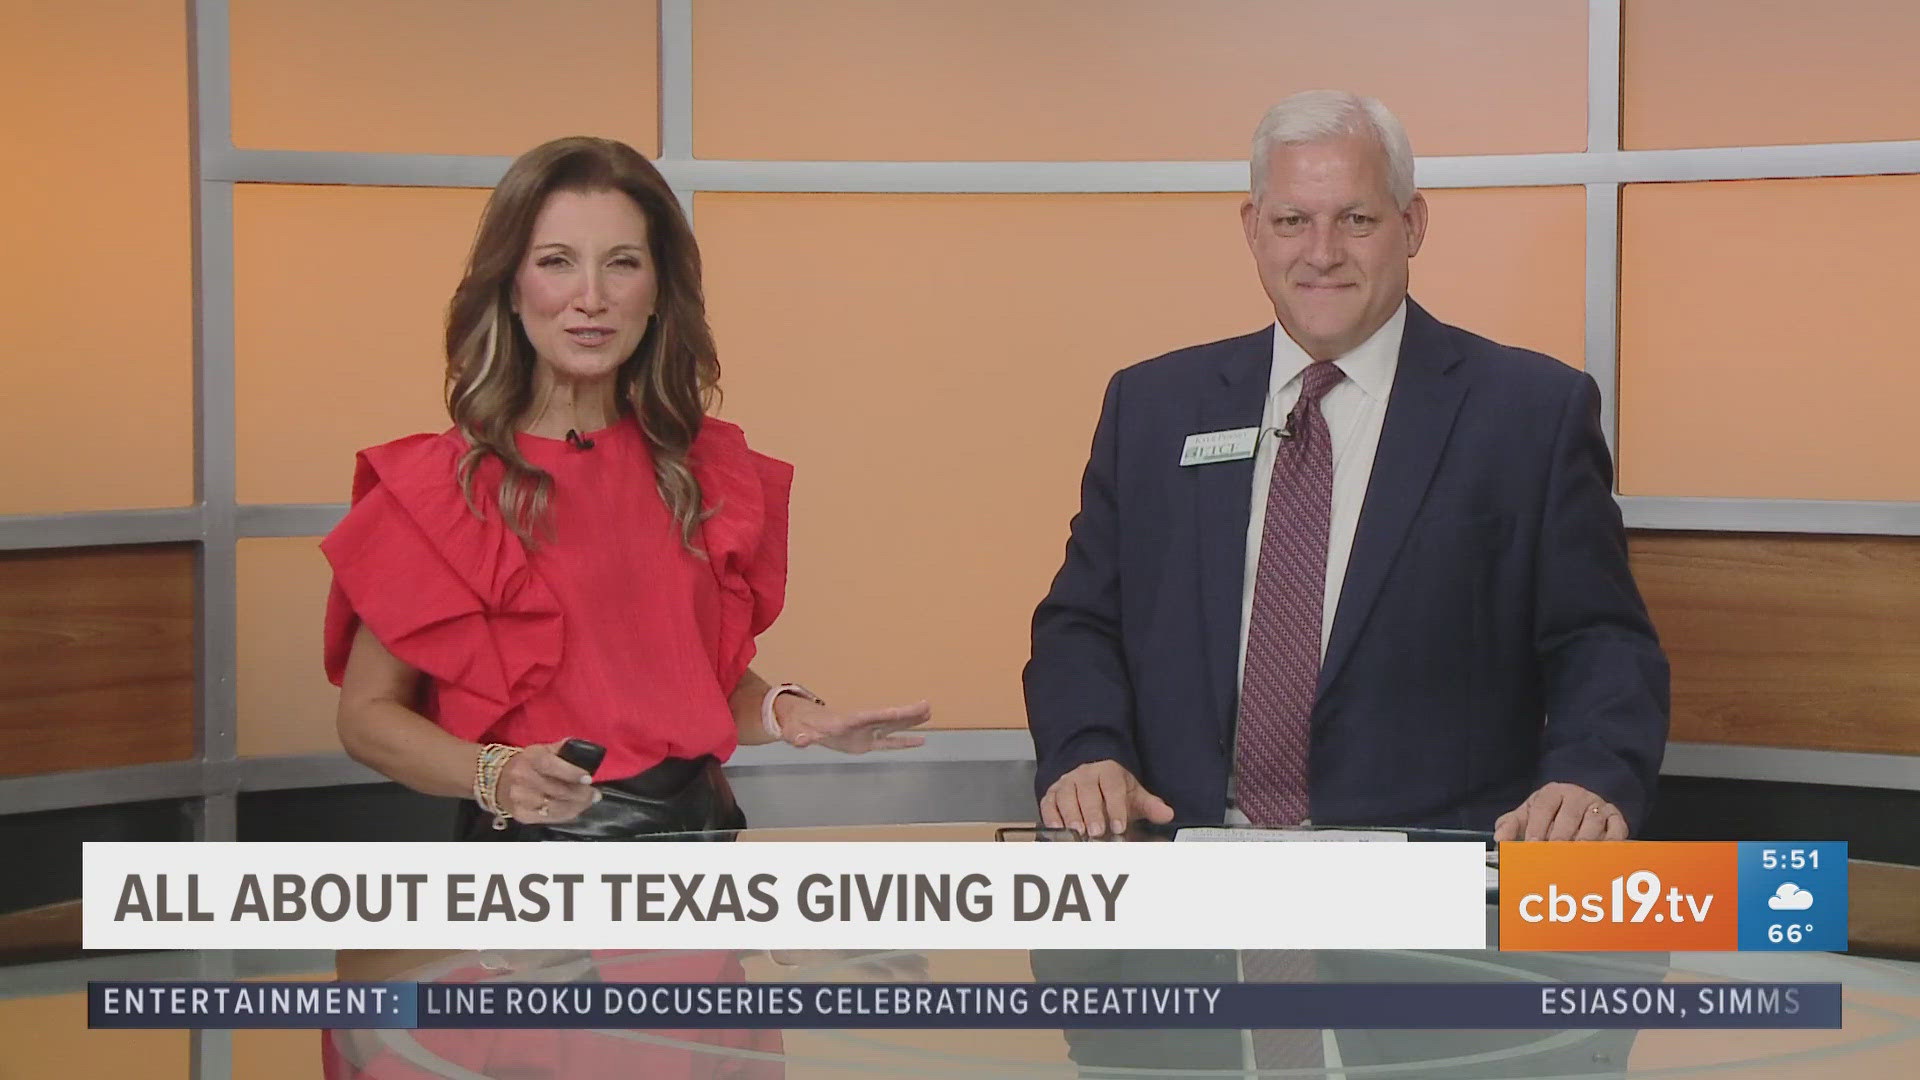 East Texas Giving Day is April 30.